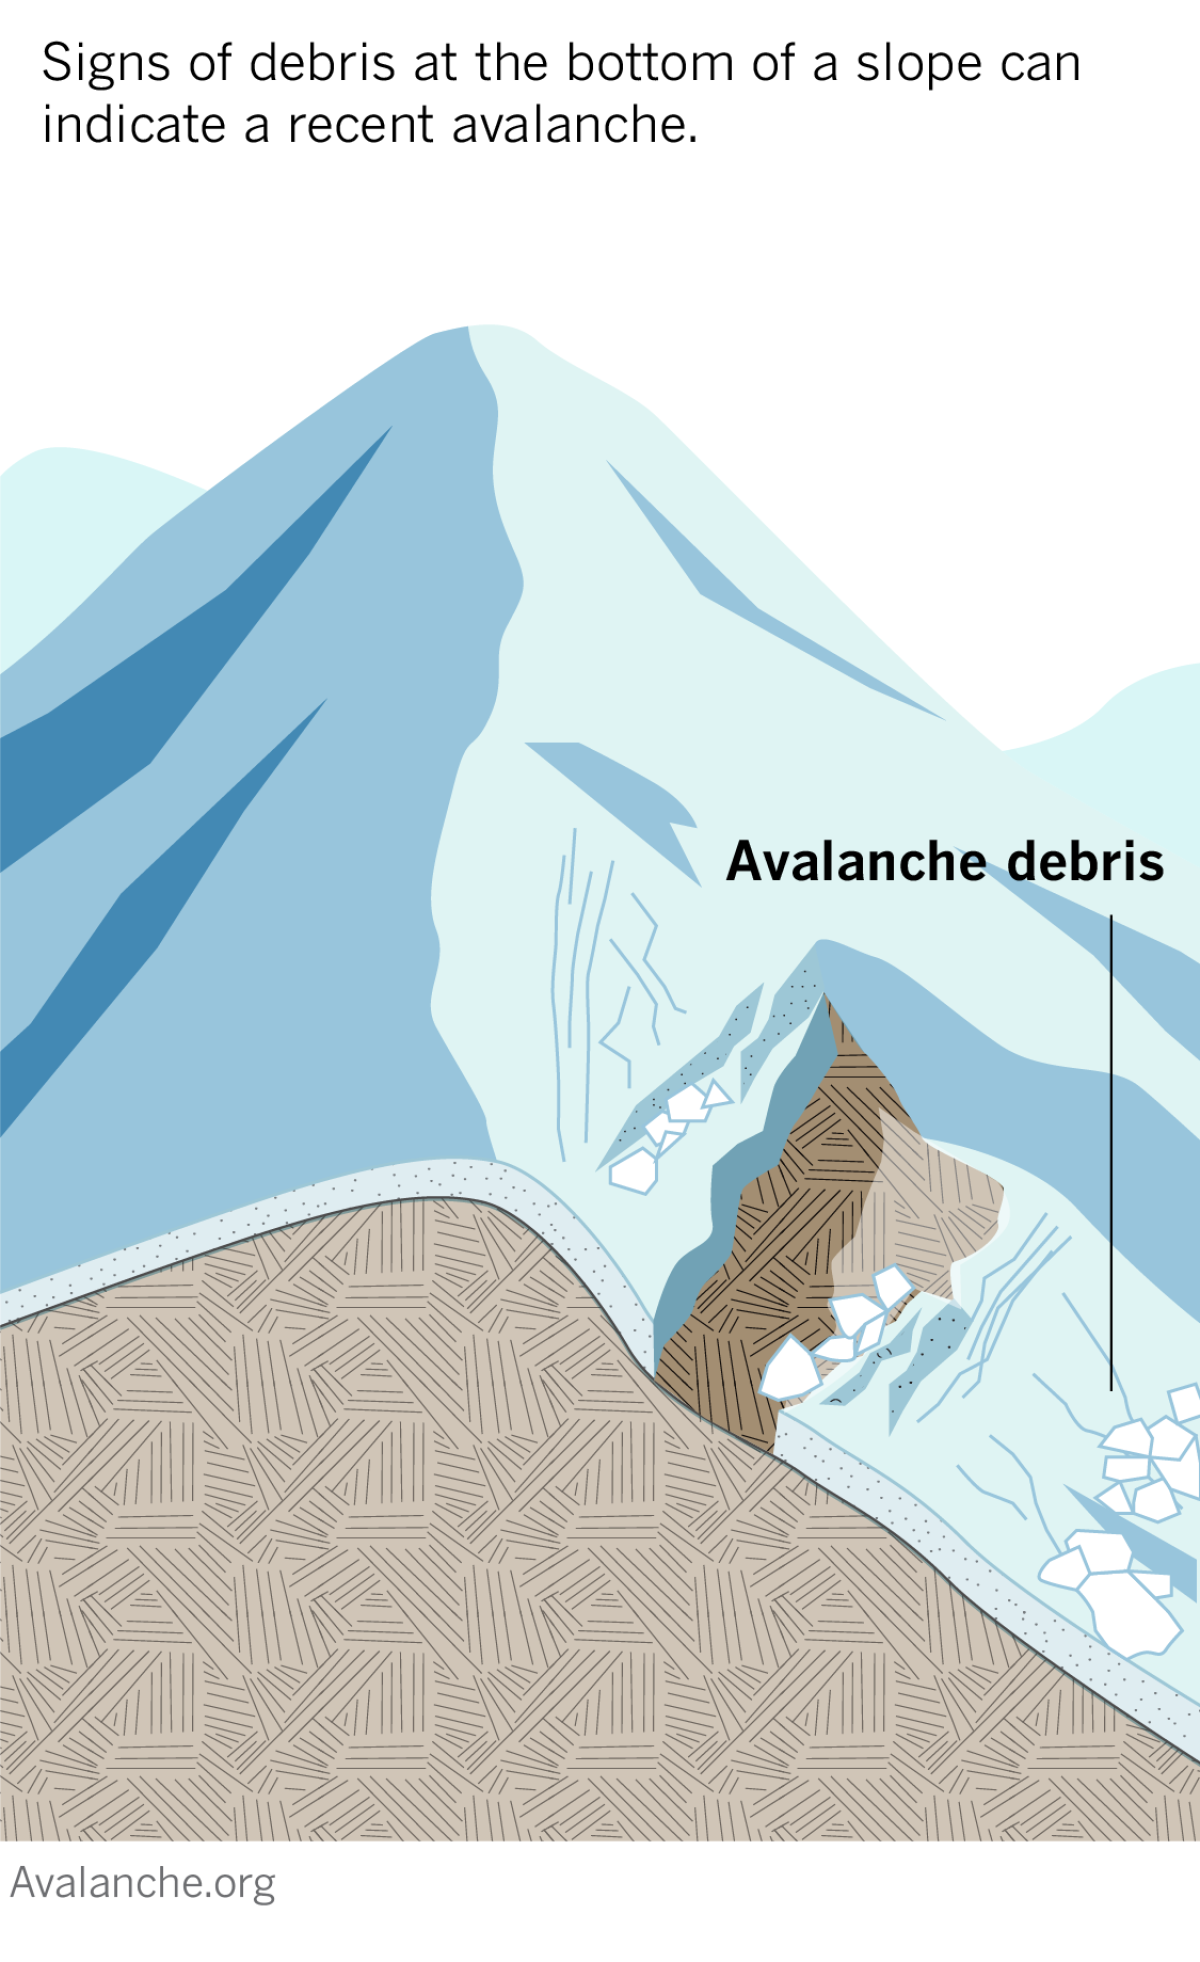 Diagram shows signs of debris at the bottom of a slope can indicate a recent avalanche.